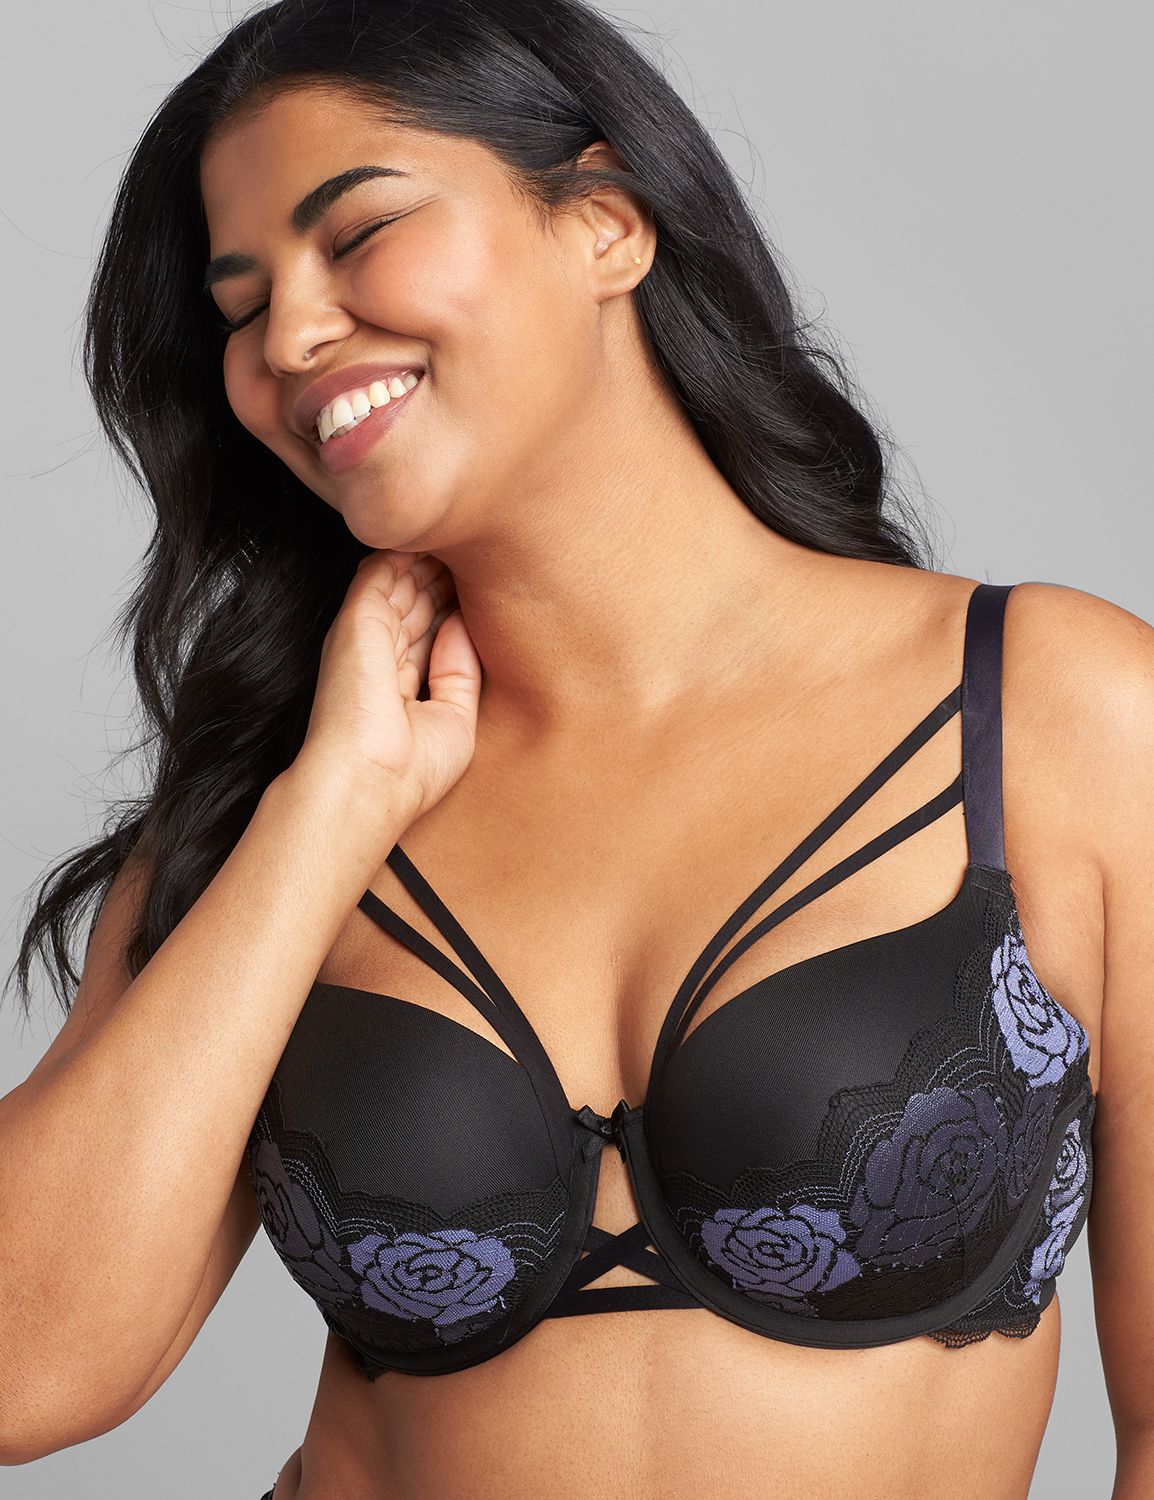 LANE BRYANT CACIQUE Bra 40DD French Full Coverage Cooling Black White  Floral $29.99 - PicClick